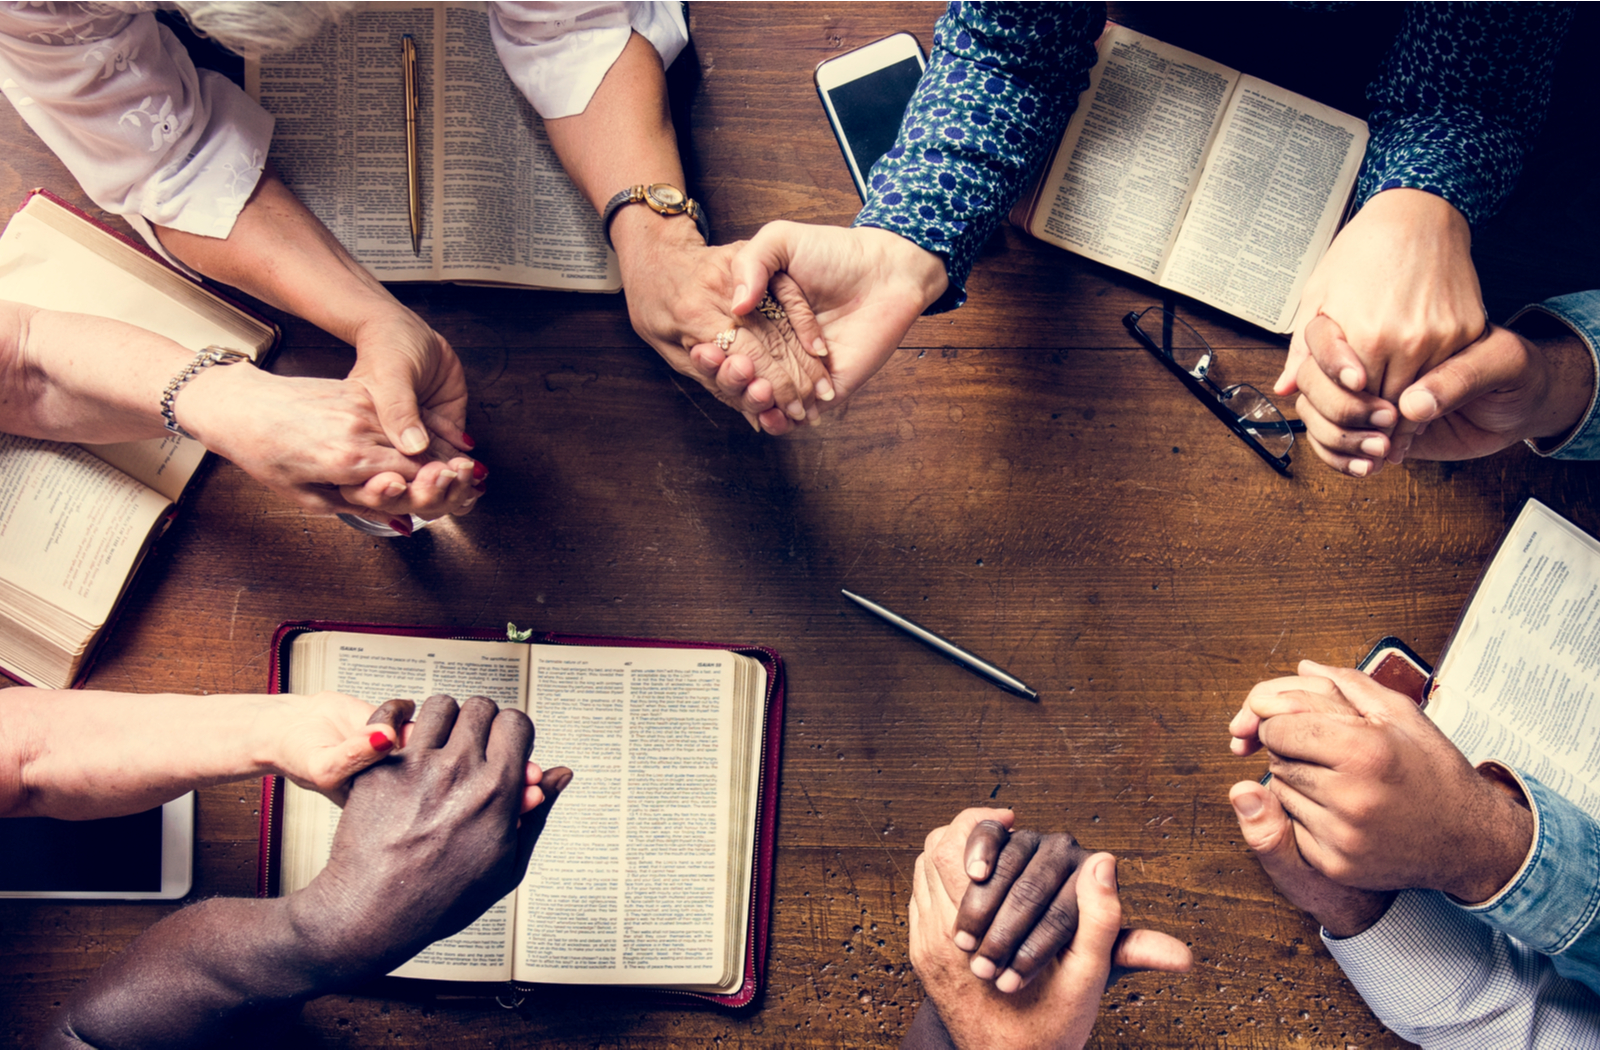 a group of people sharing in worship by holding hands in a circle over some bibles